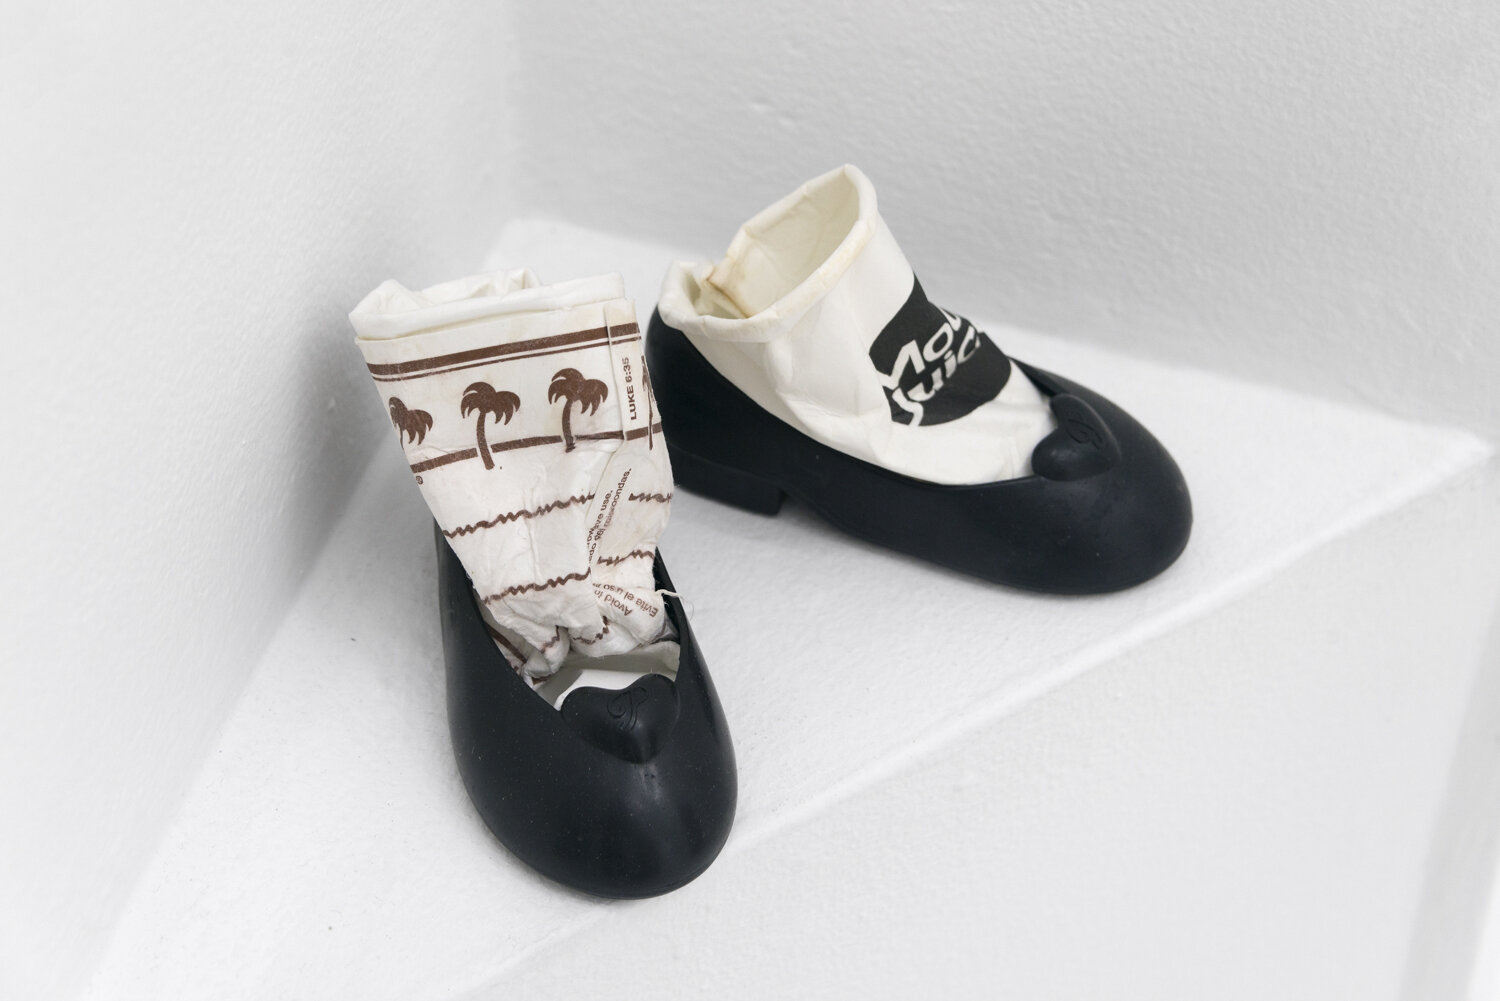   Becky , 2020, Doll shoes, paper 8 x 6 x 4 in  